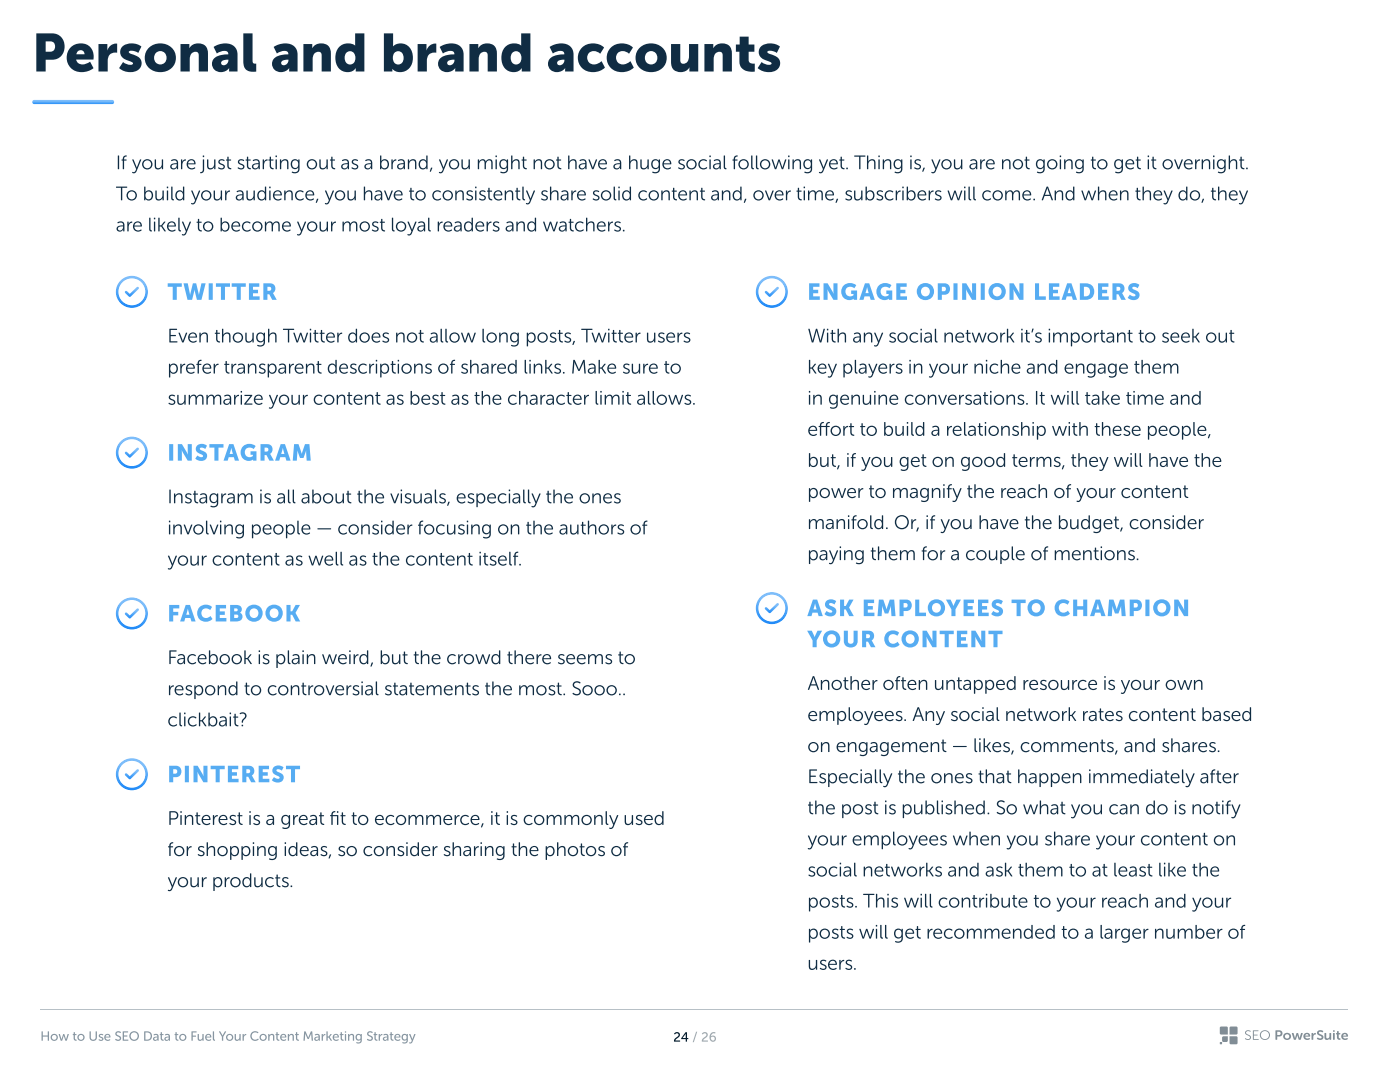 Personal and brand accounts